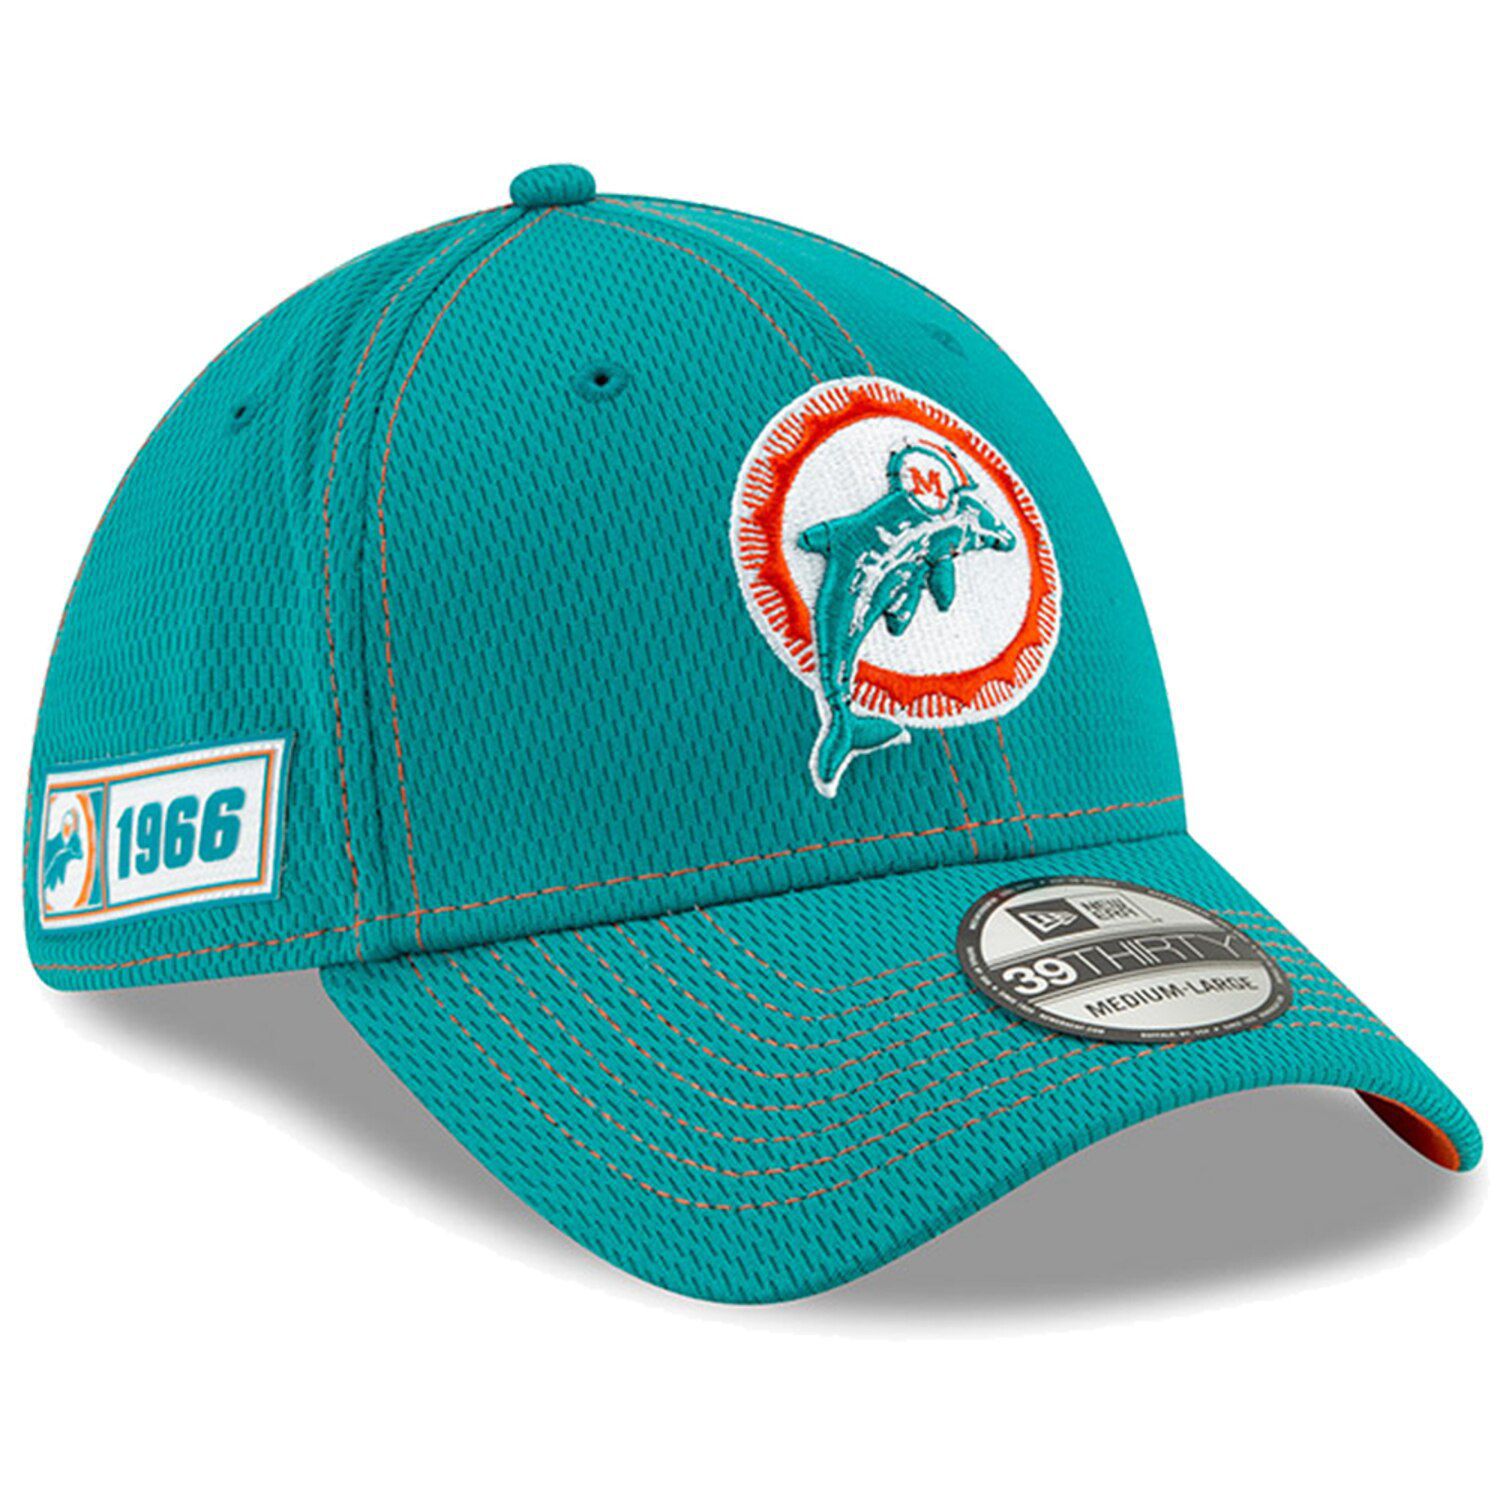 miami dolphins youth hat